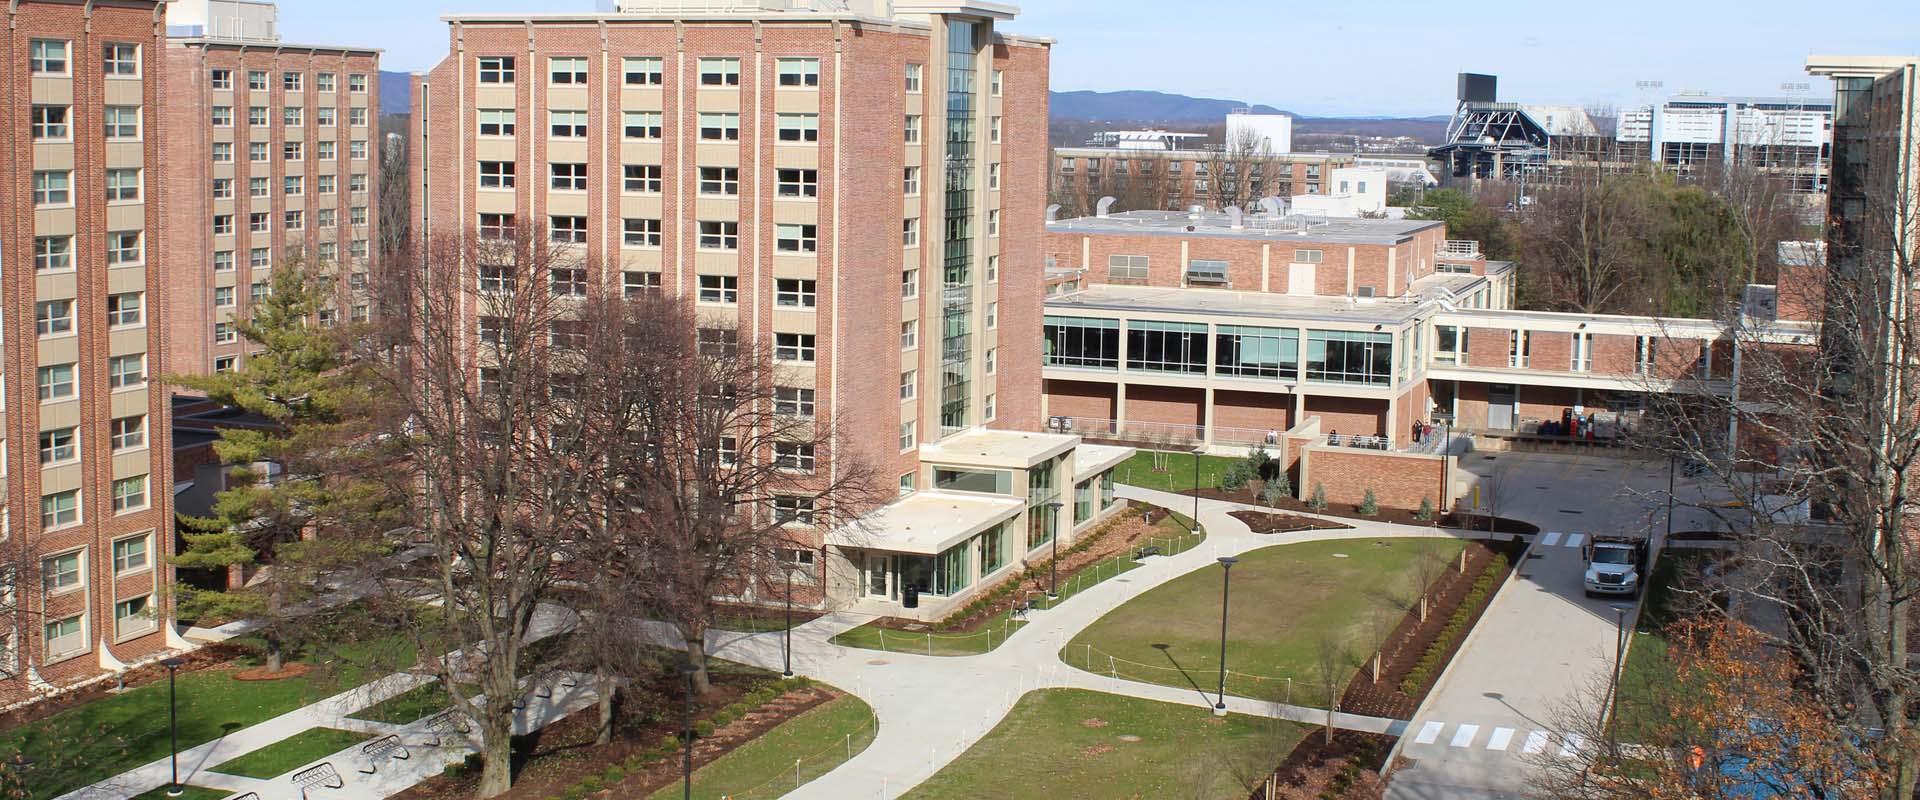 arial view of residence halls 